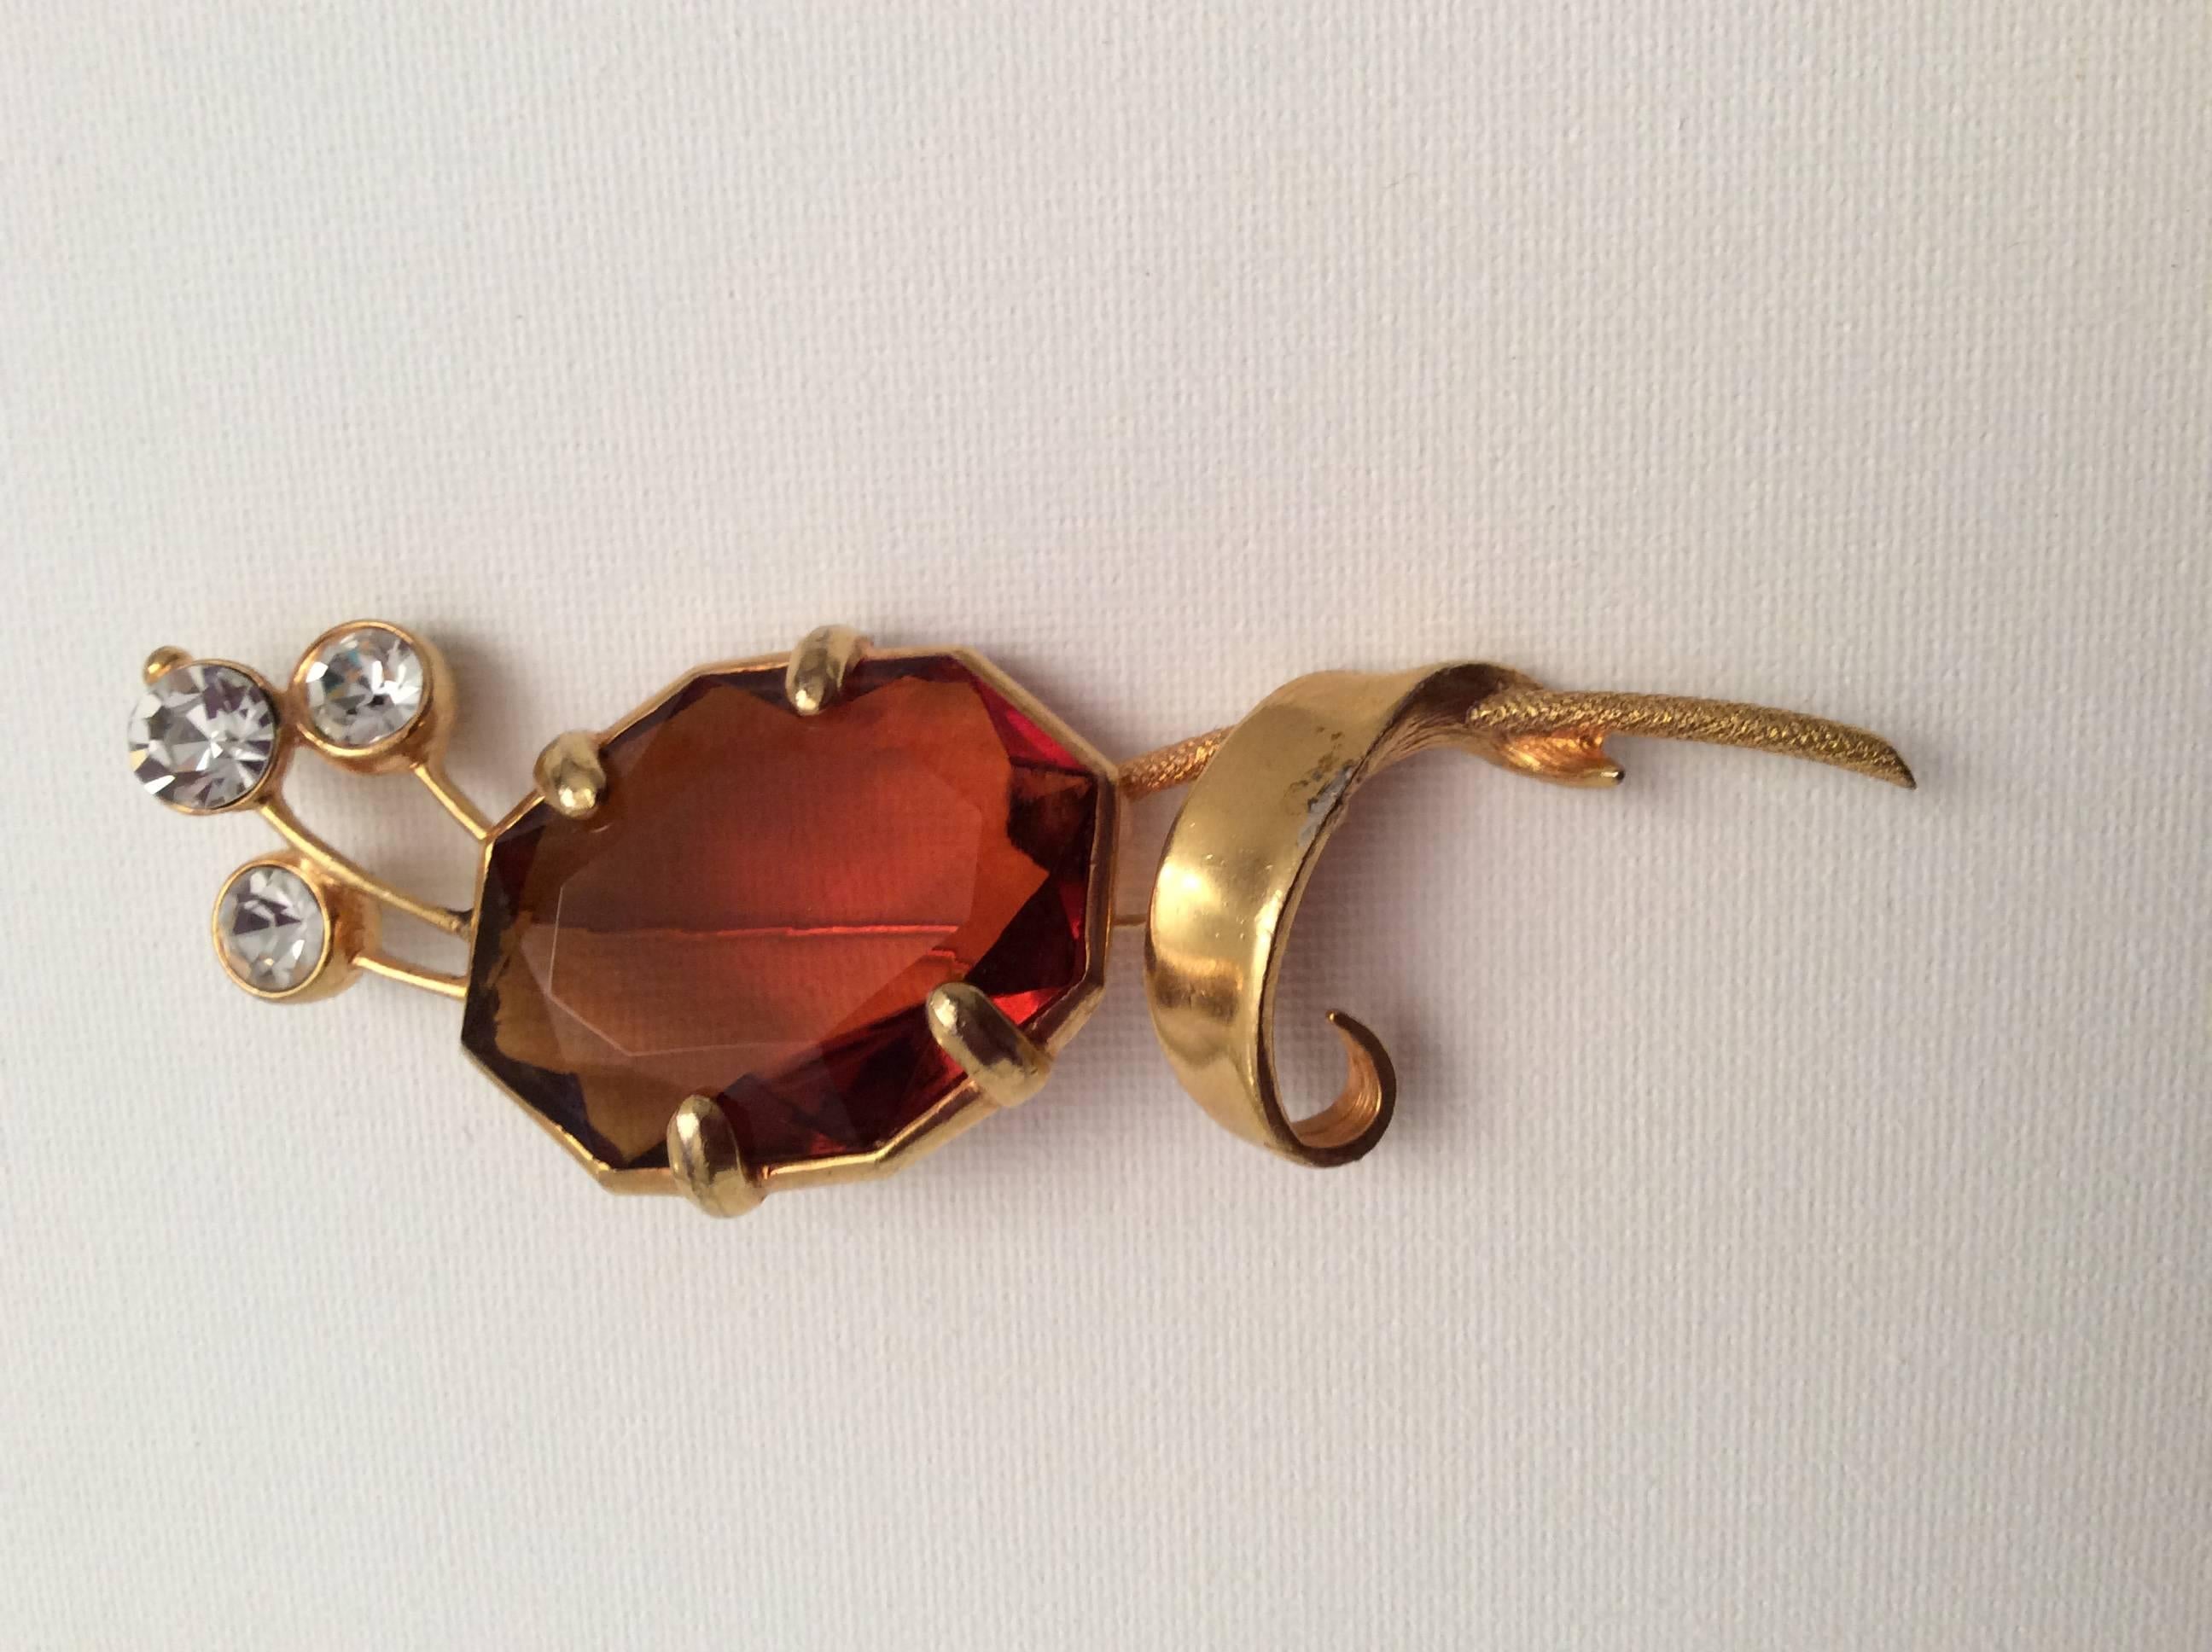 Women's Vintage Christian Dior Brooch Pin - 1960's For Sale